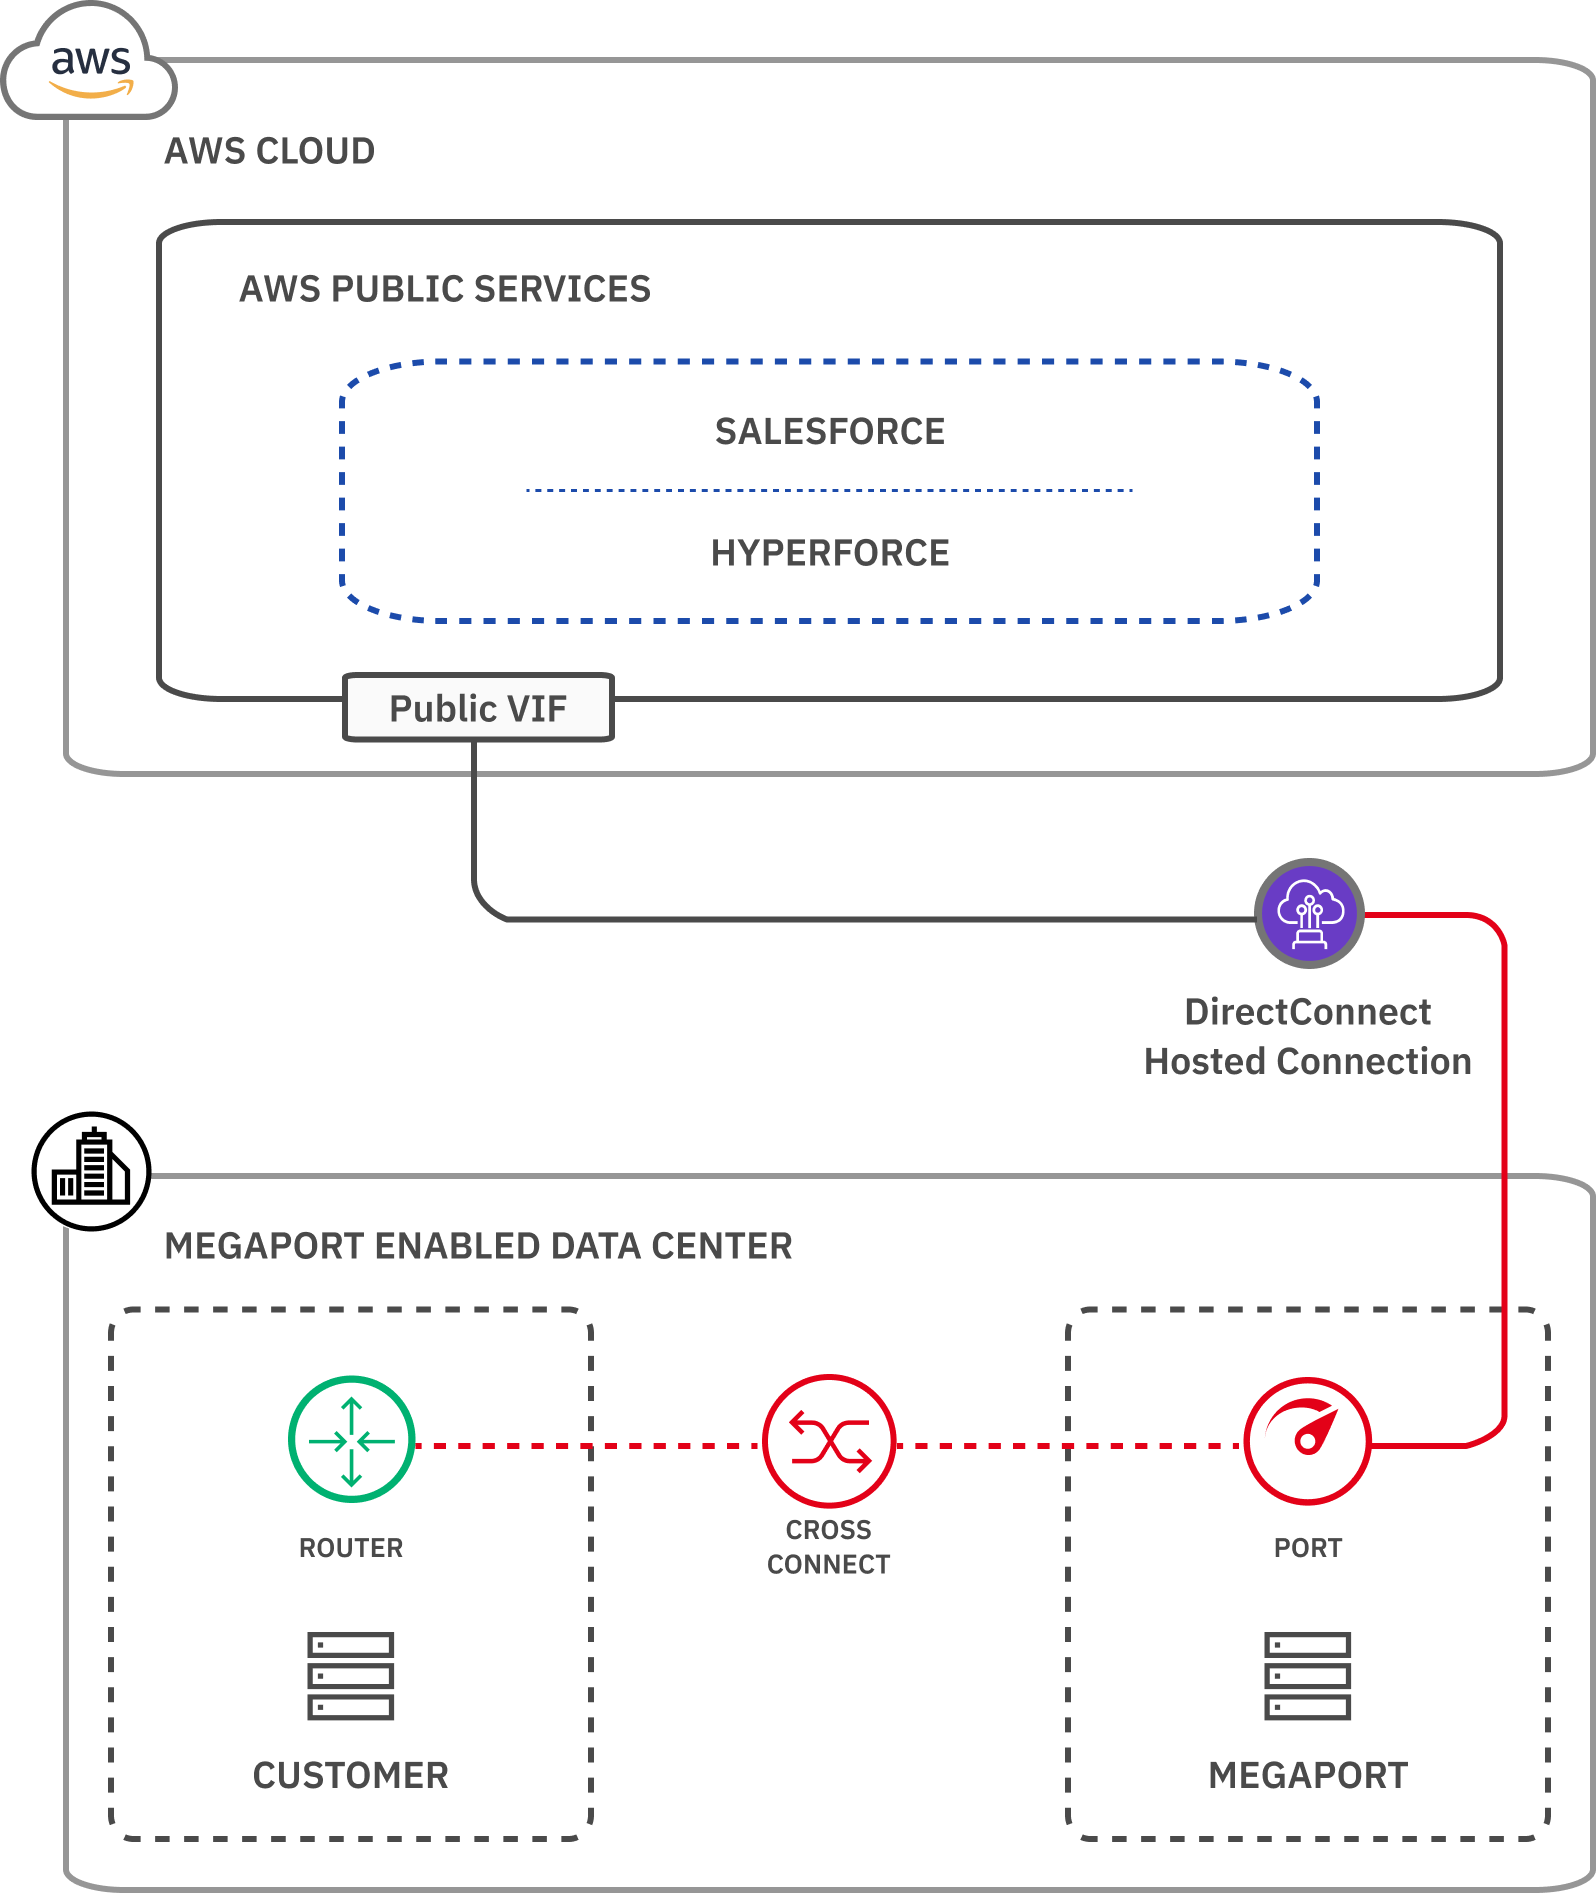 Megaport-Hyperforce on AWS architecture - This image shows Port access to Hyperforce via Public VIF